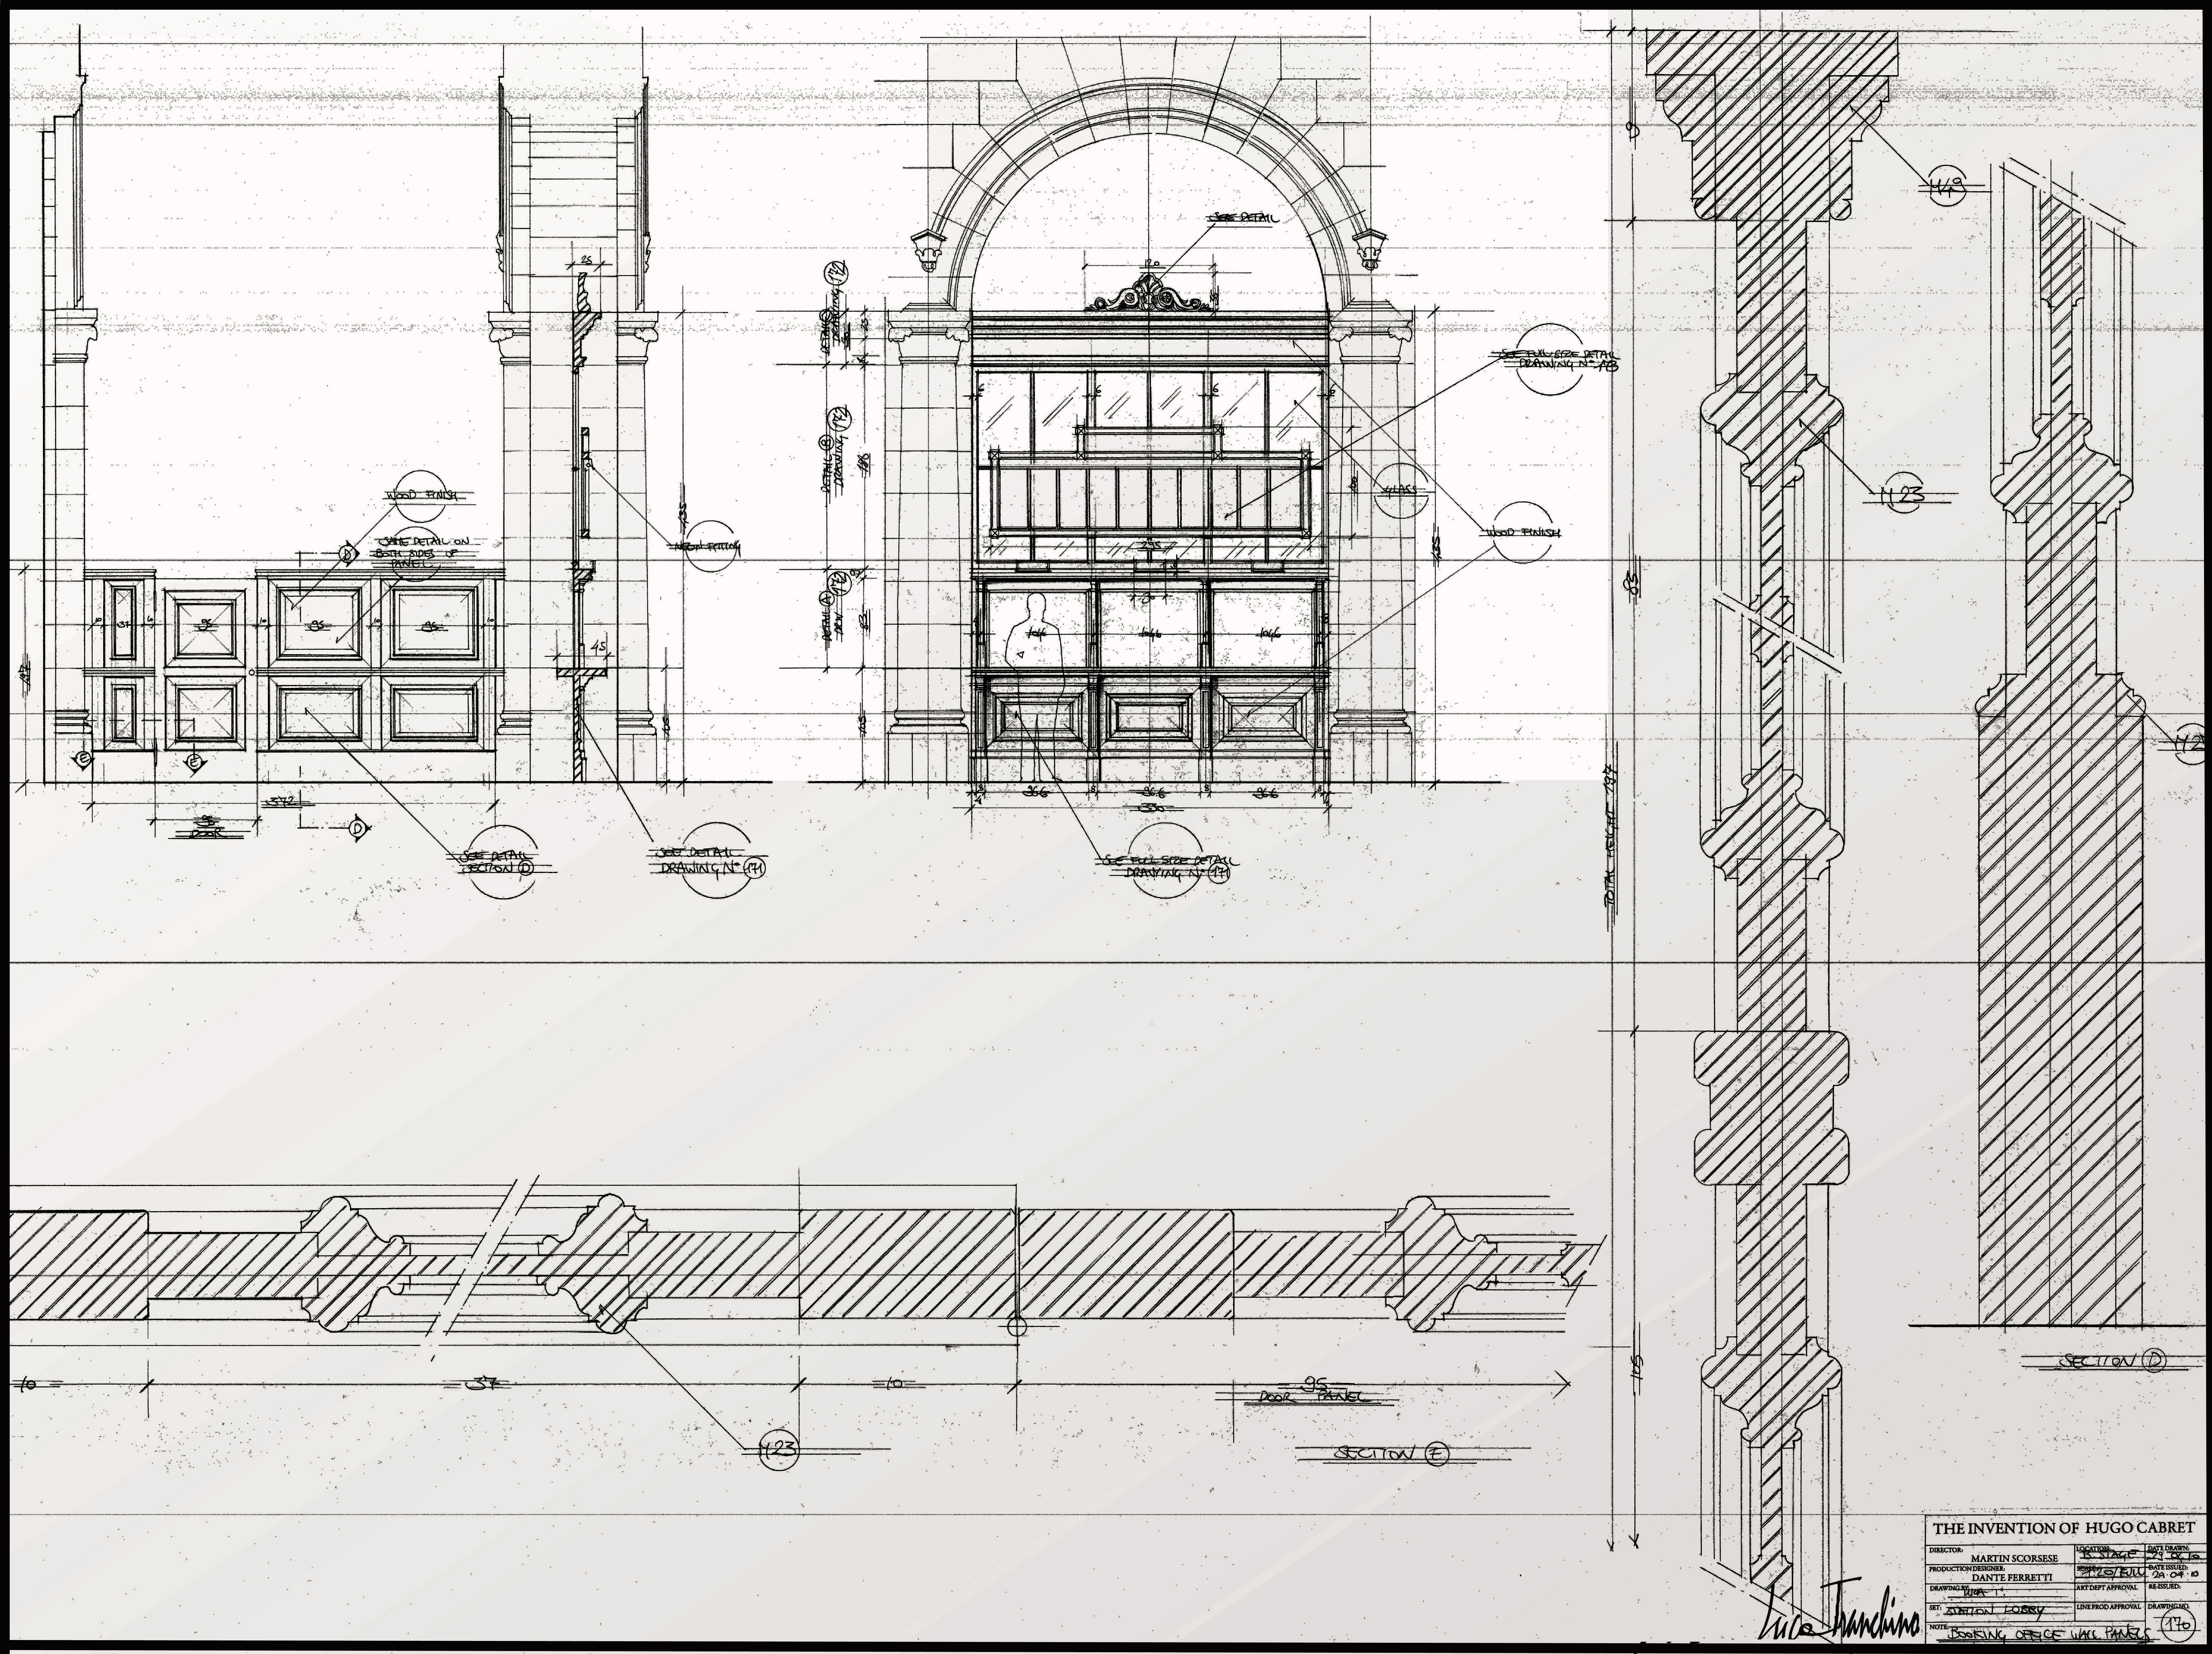 HUGO - Directed by Martin Scorsese - Int. Montparnasse Station, Technical Drawing Details by Luca Tranchino - ©2011 - Sony Pictures